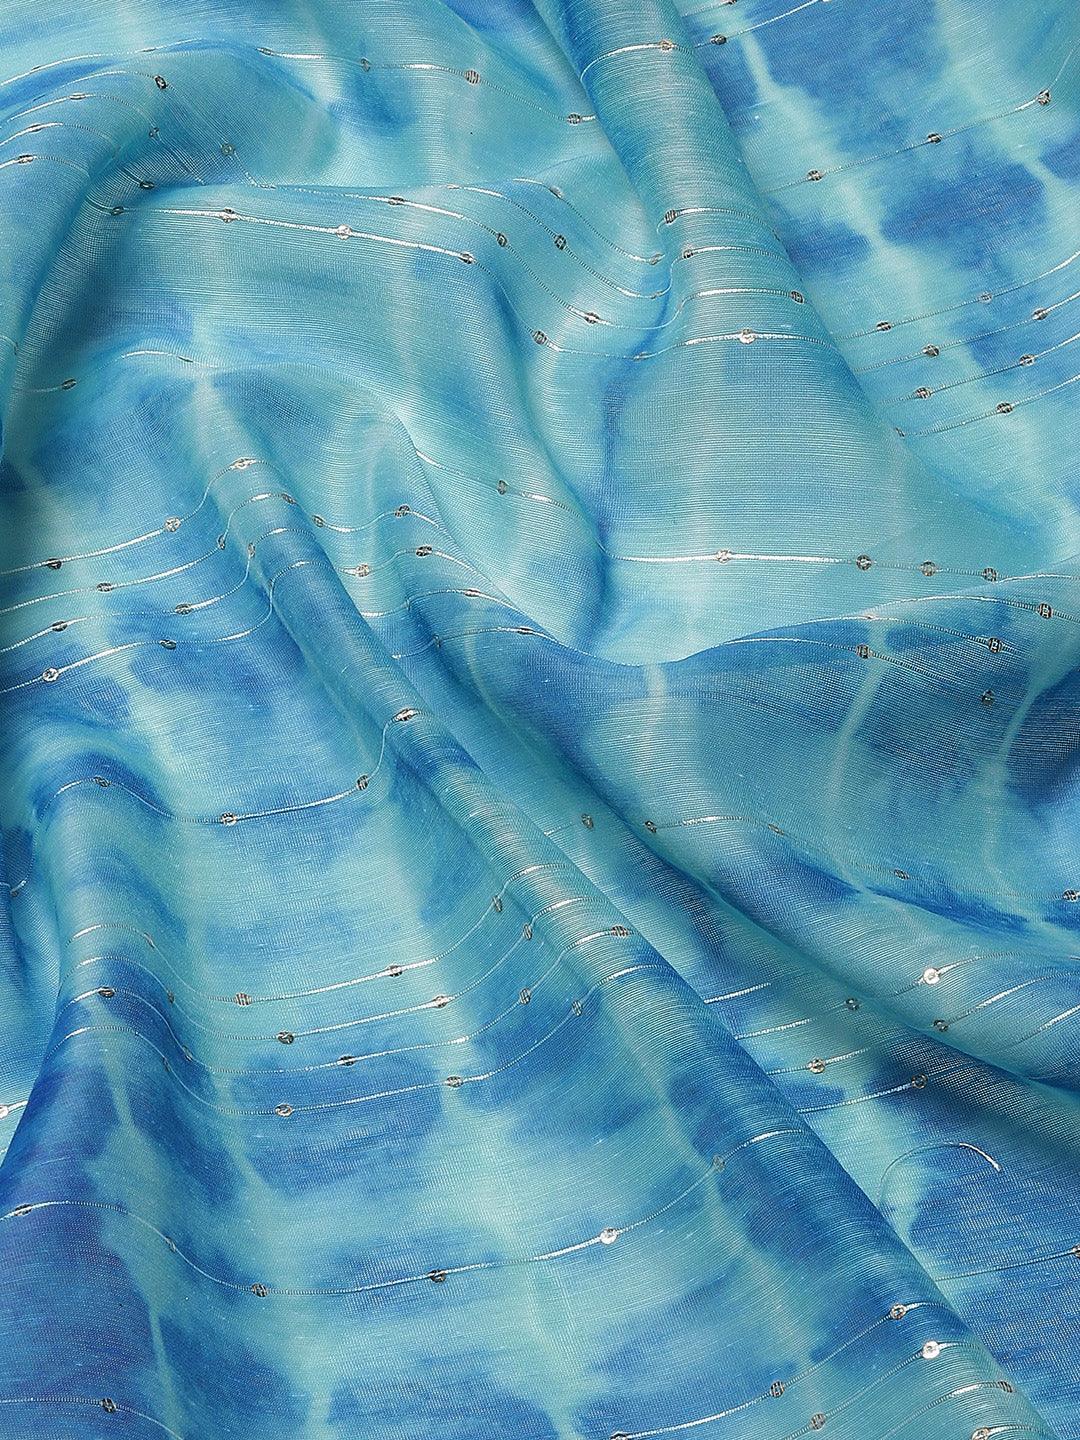 Gorgeous Sky Blue Poly Cotton Sequence Tie Dye Printed Saree - Indiakreations